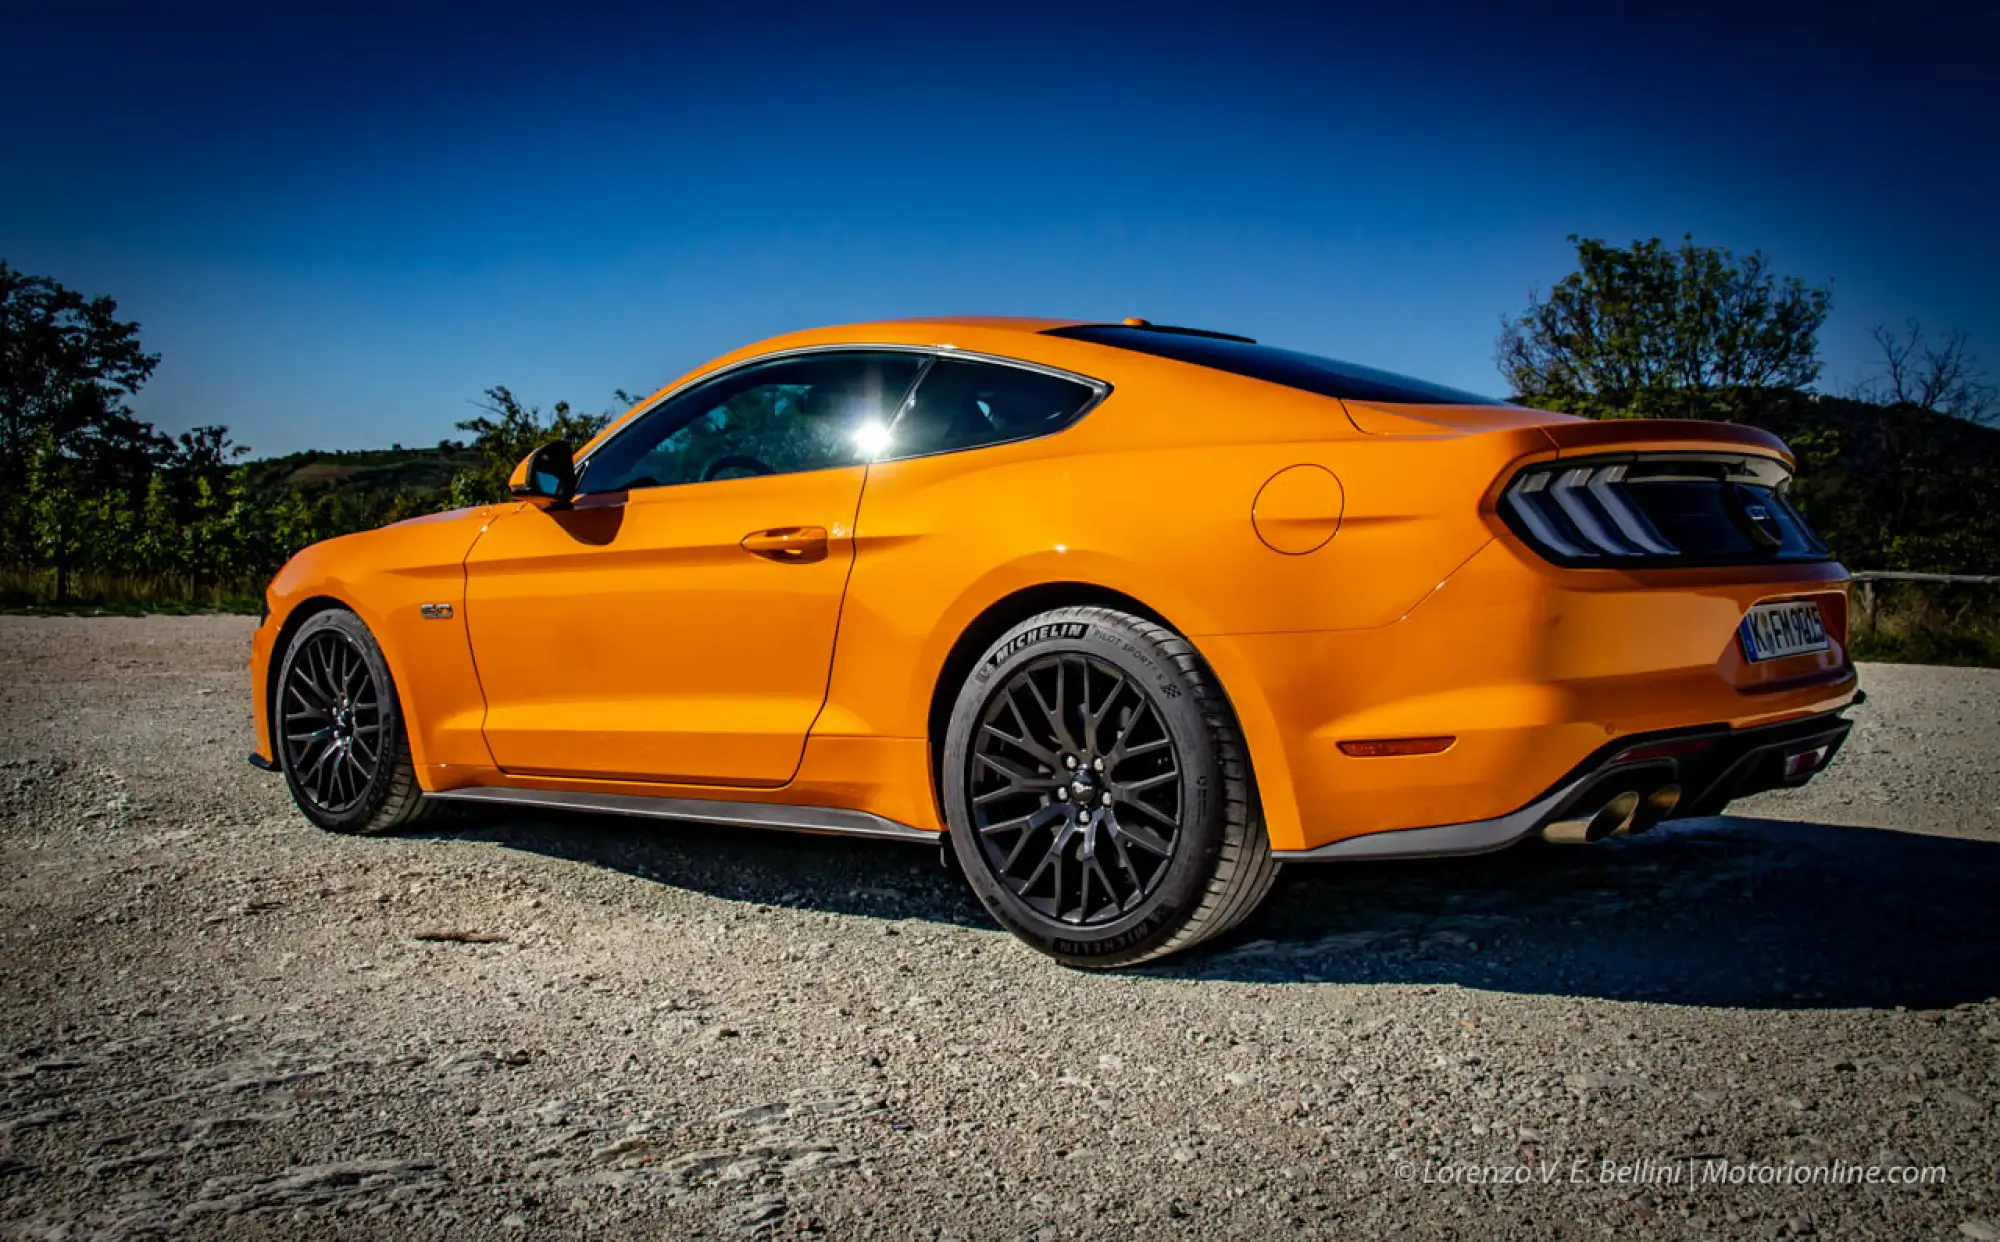 Nuova Ford Mustang MY 2018 - Test Drive in Anteprima - 10